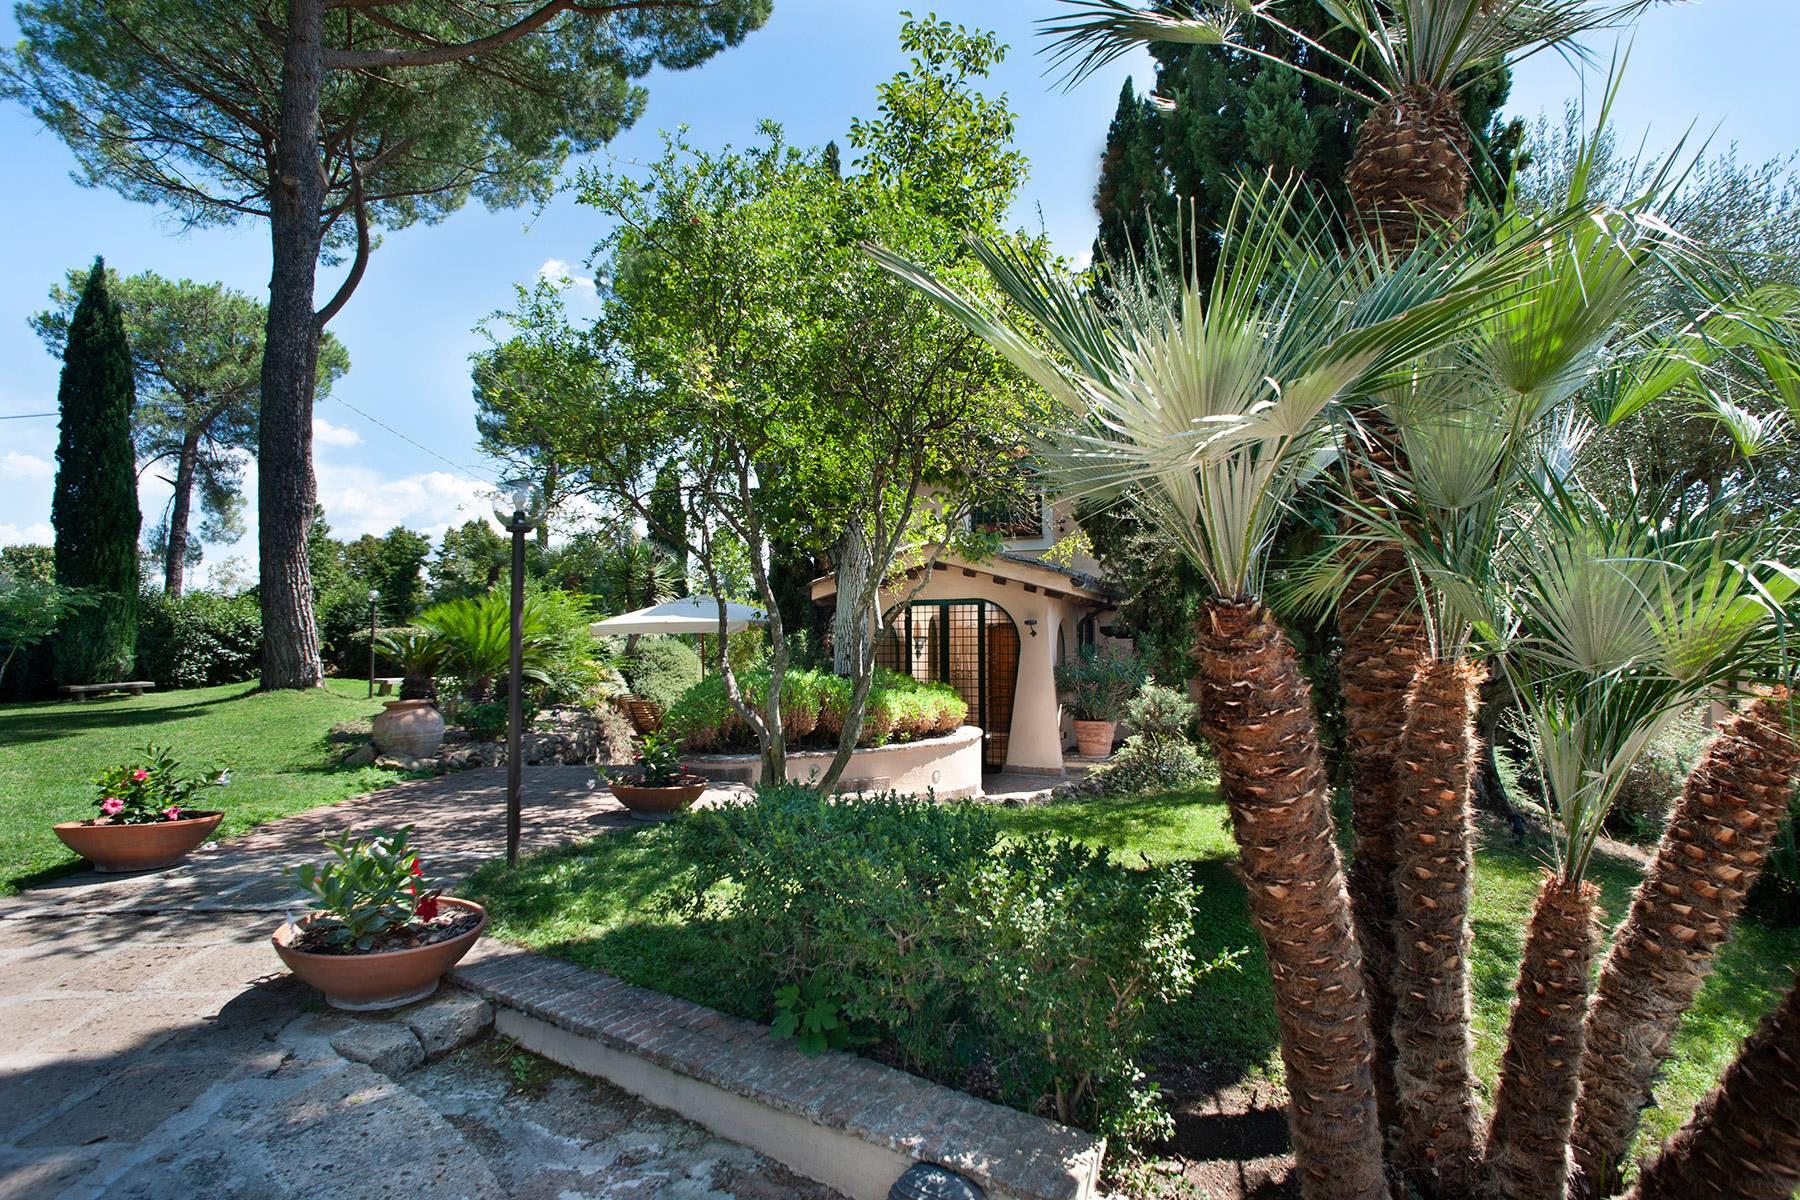 Villa Nayara - Lovely mansion with swimming pool 30 minutes from Rome - 58